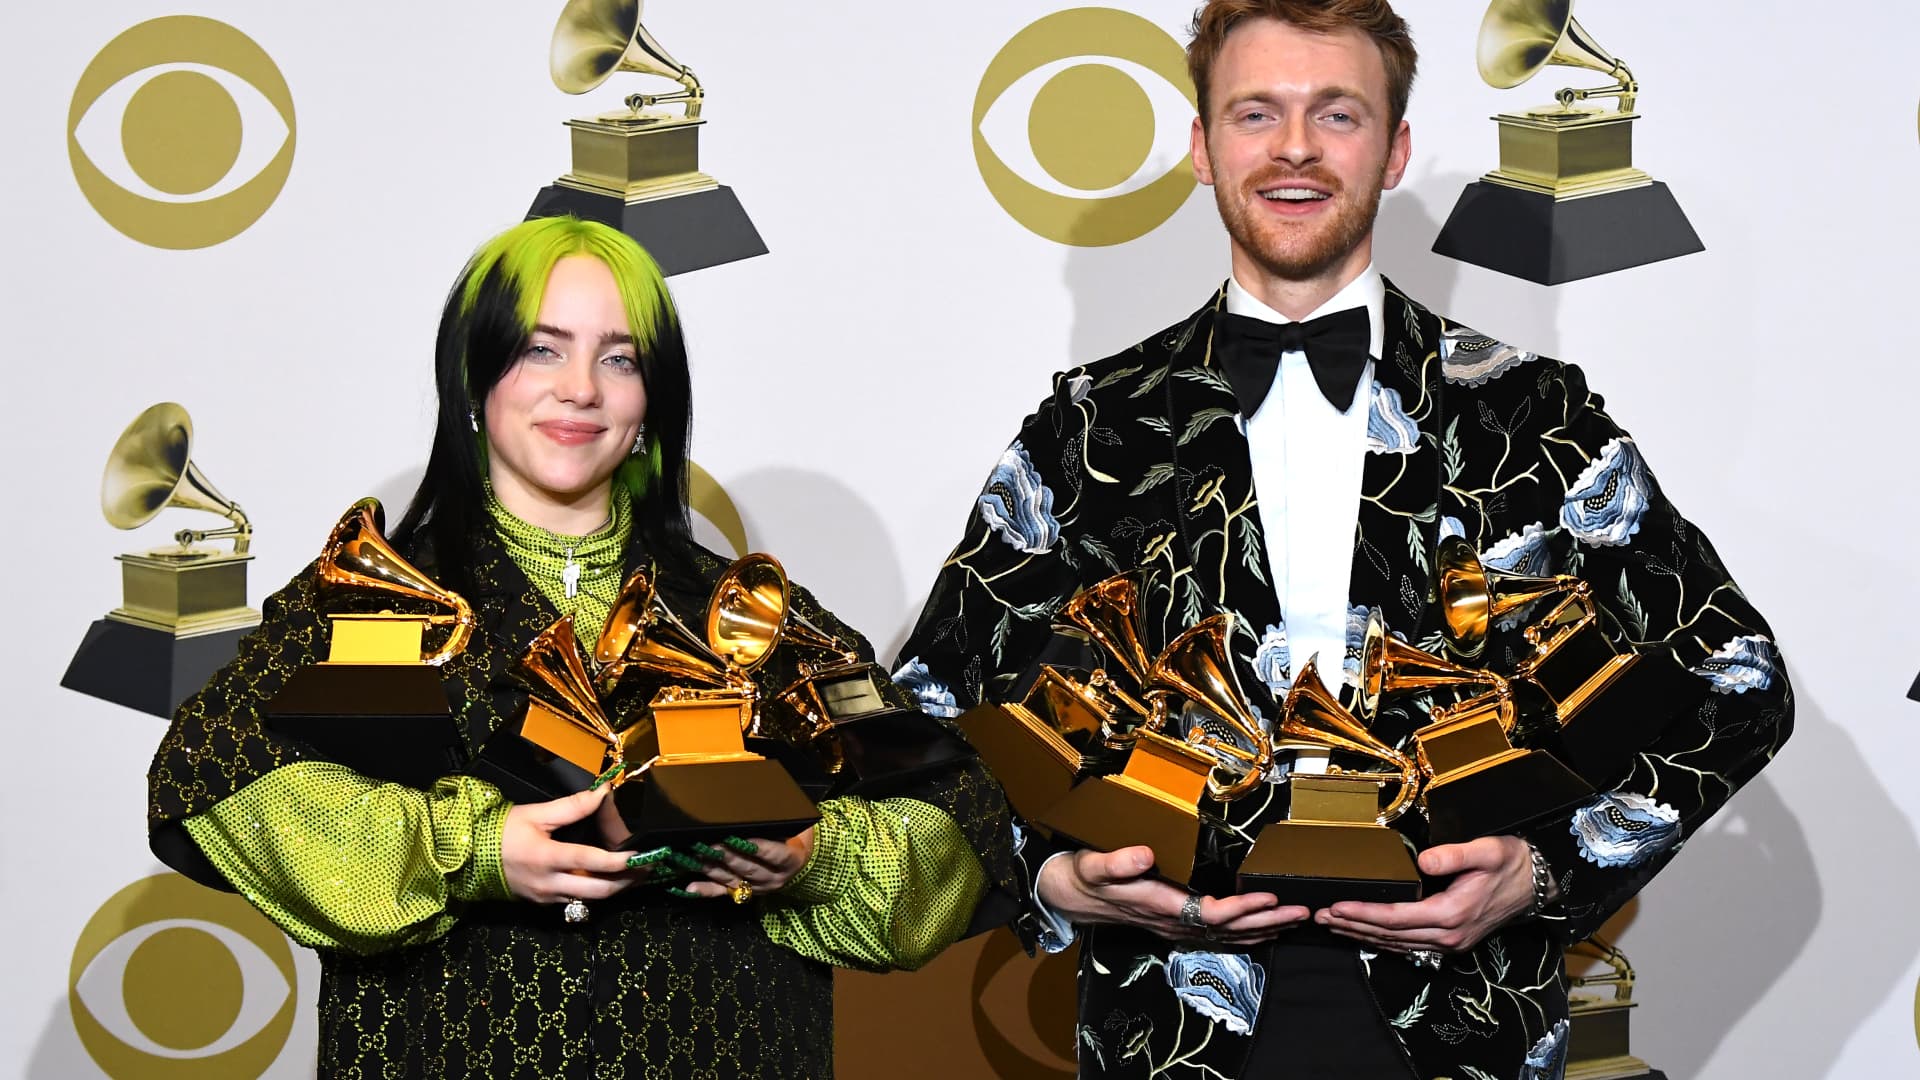 Billie Eilish and Finneas O'Connel poses at the 62nd Annual GRAMMY Awards at Staples Center on January 26, 2020 in Los Angeles, California.